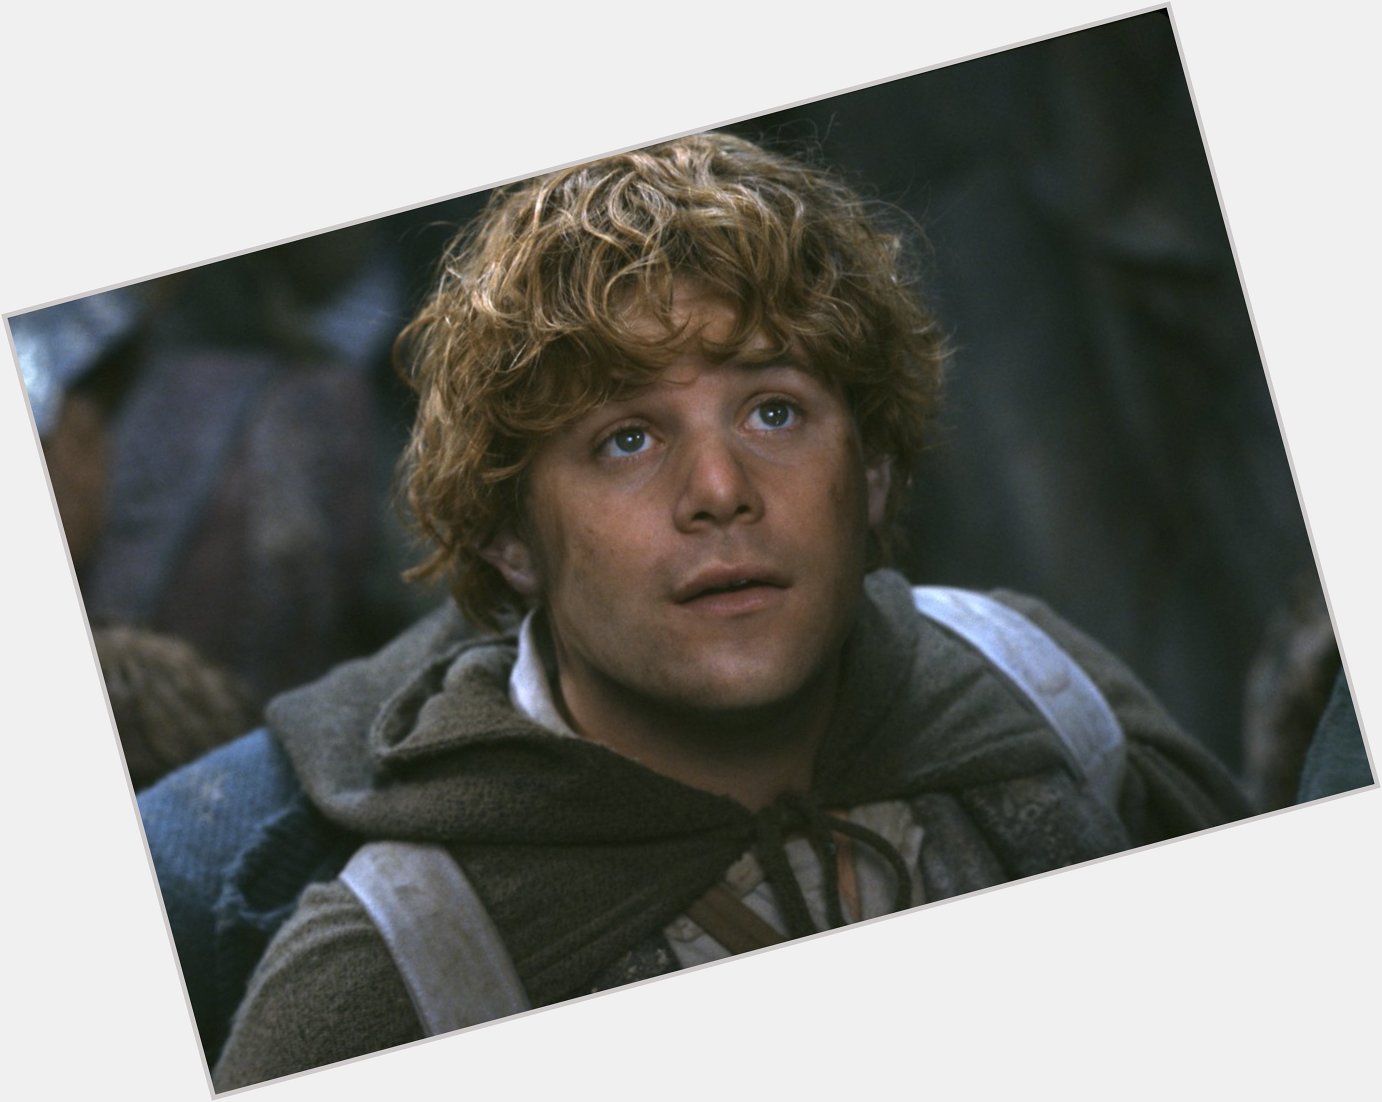 Here s to the best friend anyone could ask for. Happy Birthday to our Samwise Gamgee, Sean Astin! 